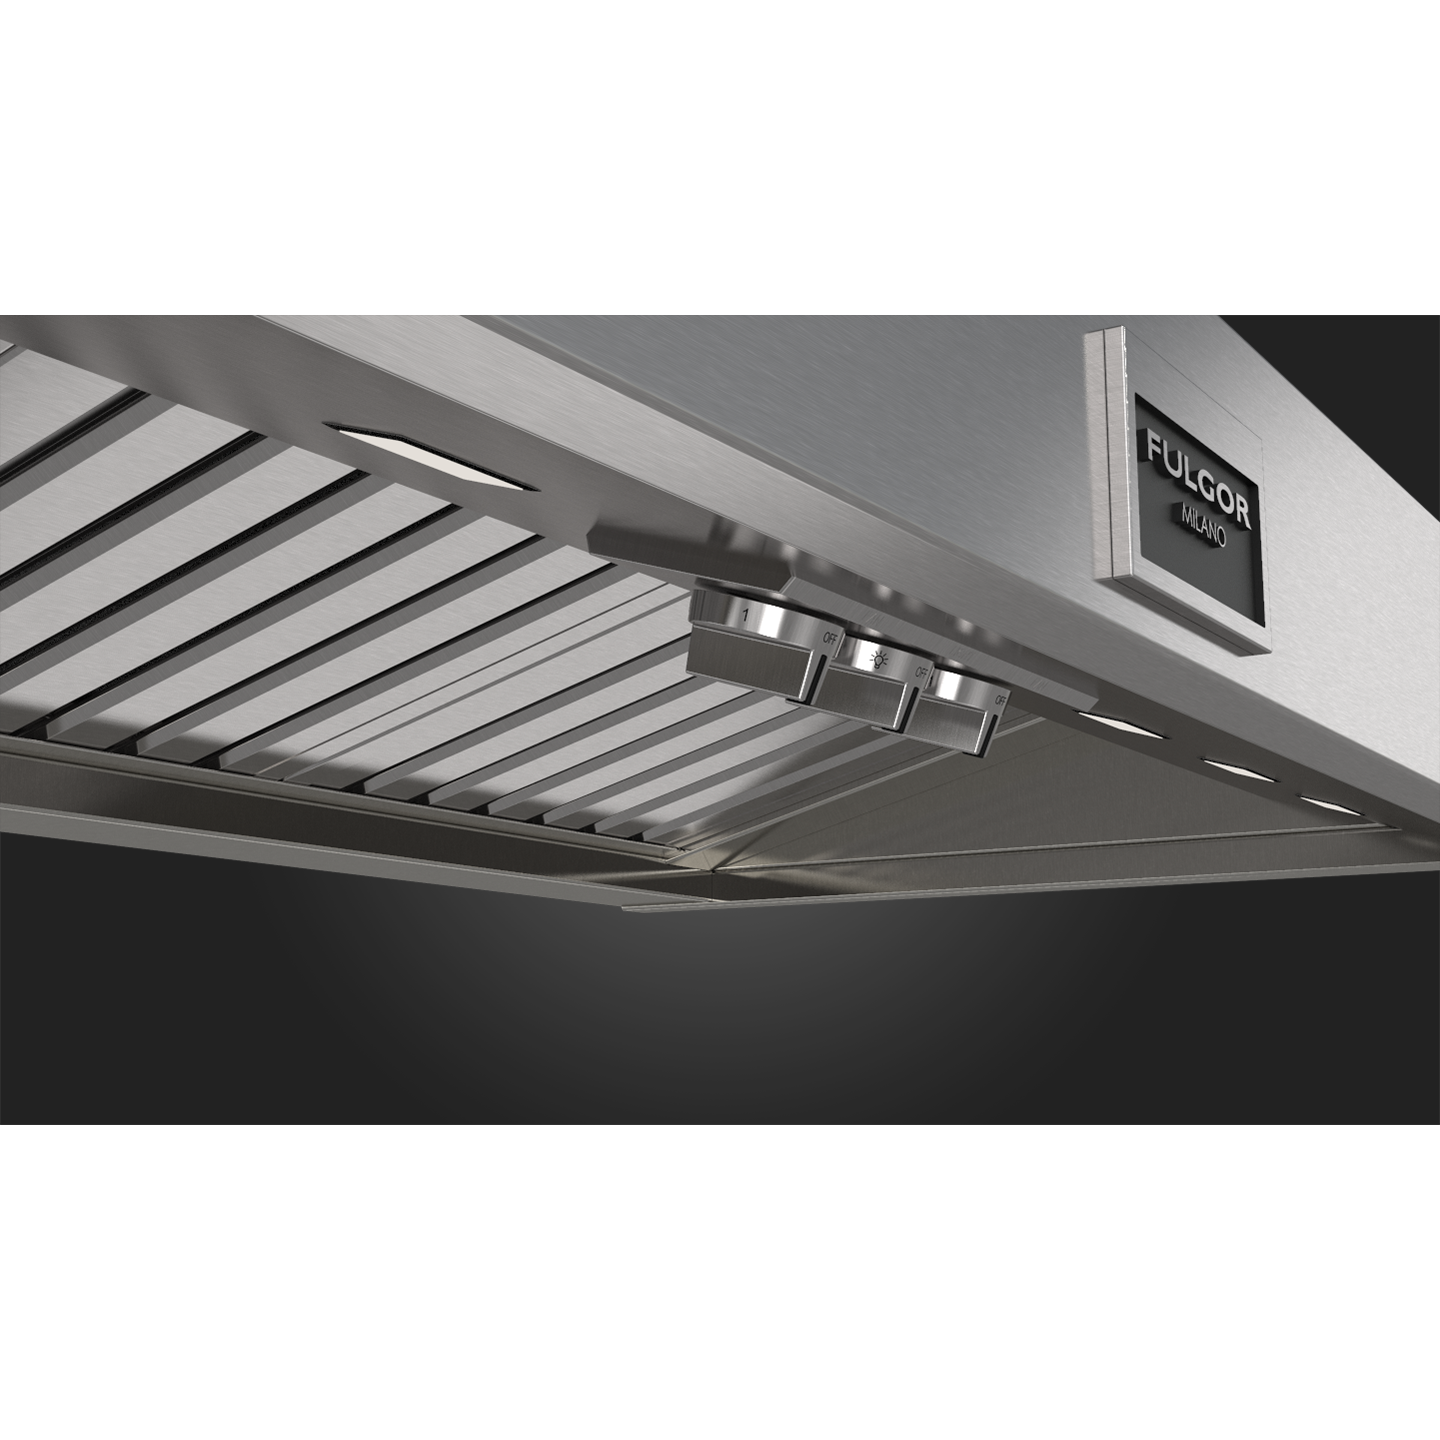 Fulgor Milano 48" Wall Mount Range Hood with 3-Speeds, 1000 CFM Blower Stainless Steel - F6PC48DS1